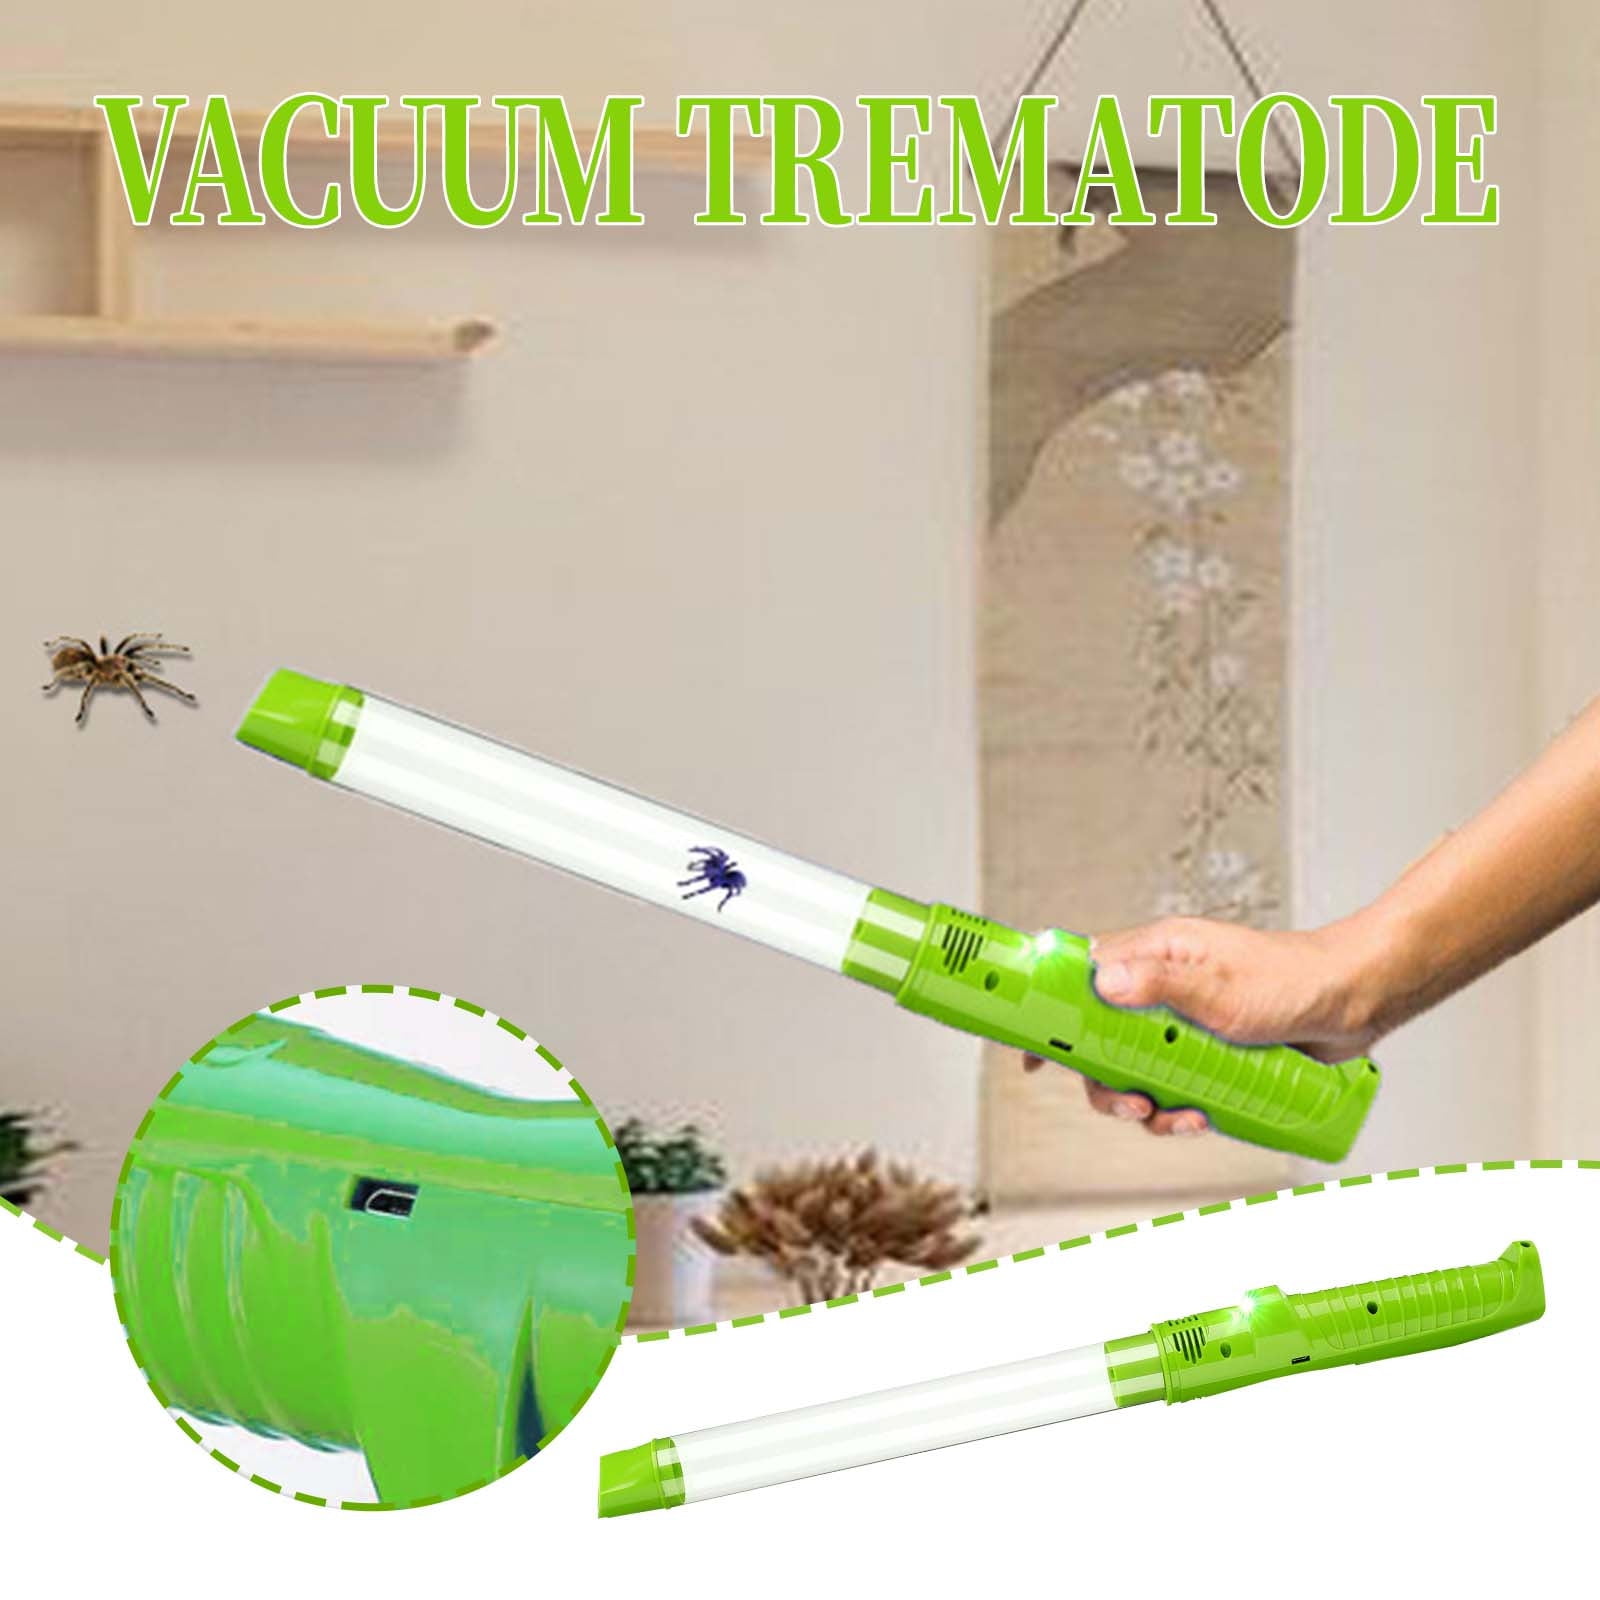 Handheld Vacuum Cleaner Spider Bug Insect Catcher Blue For Home Car 